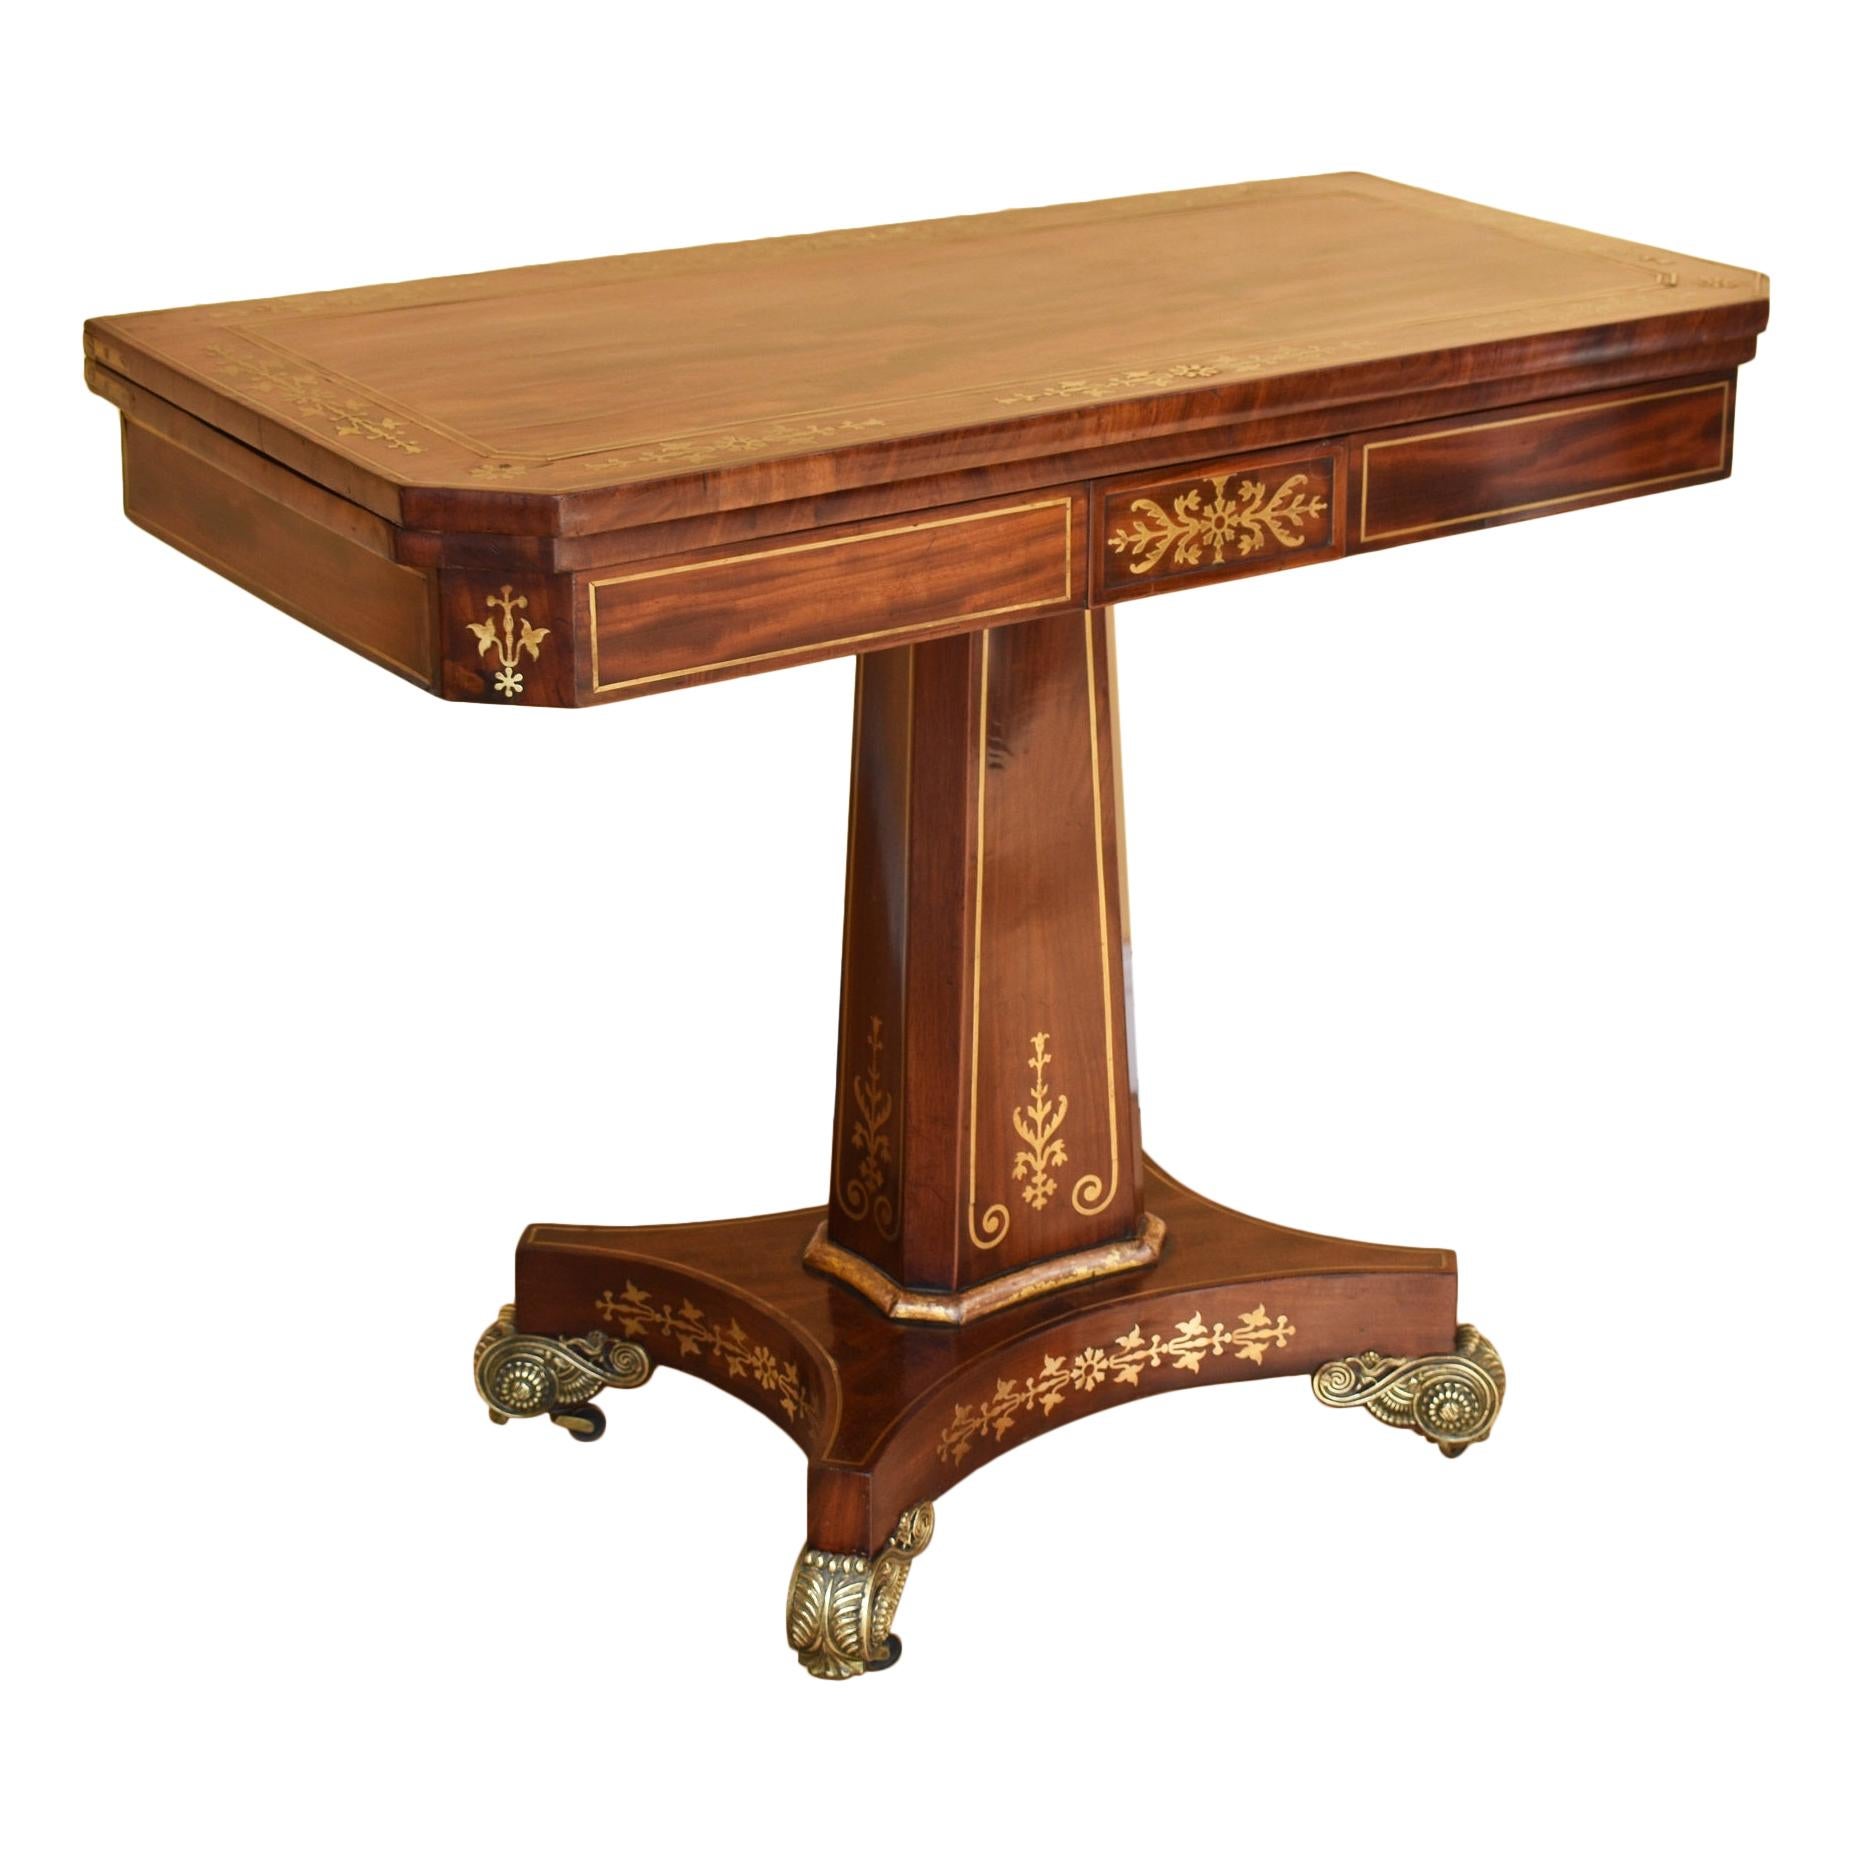 19th Century English Regency Rosewood and Brass Inlaid Card Table